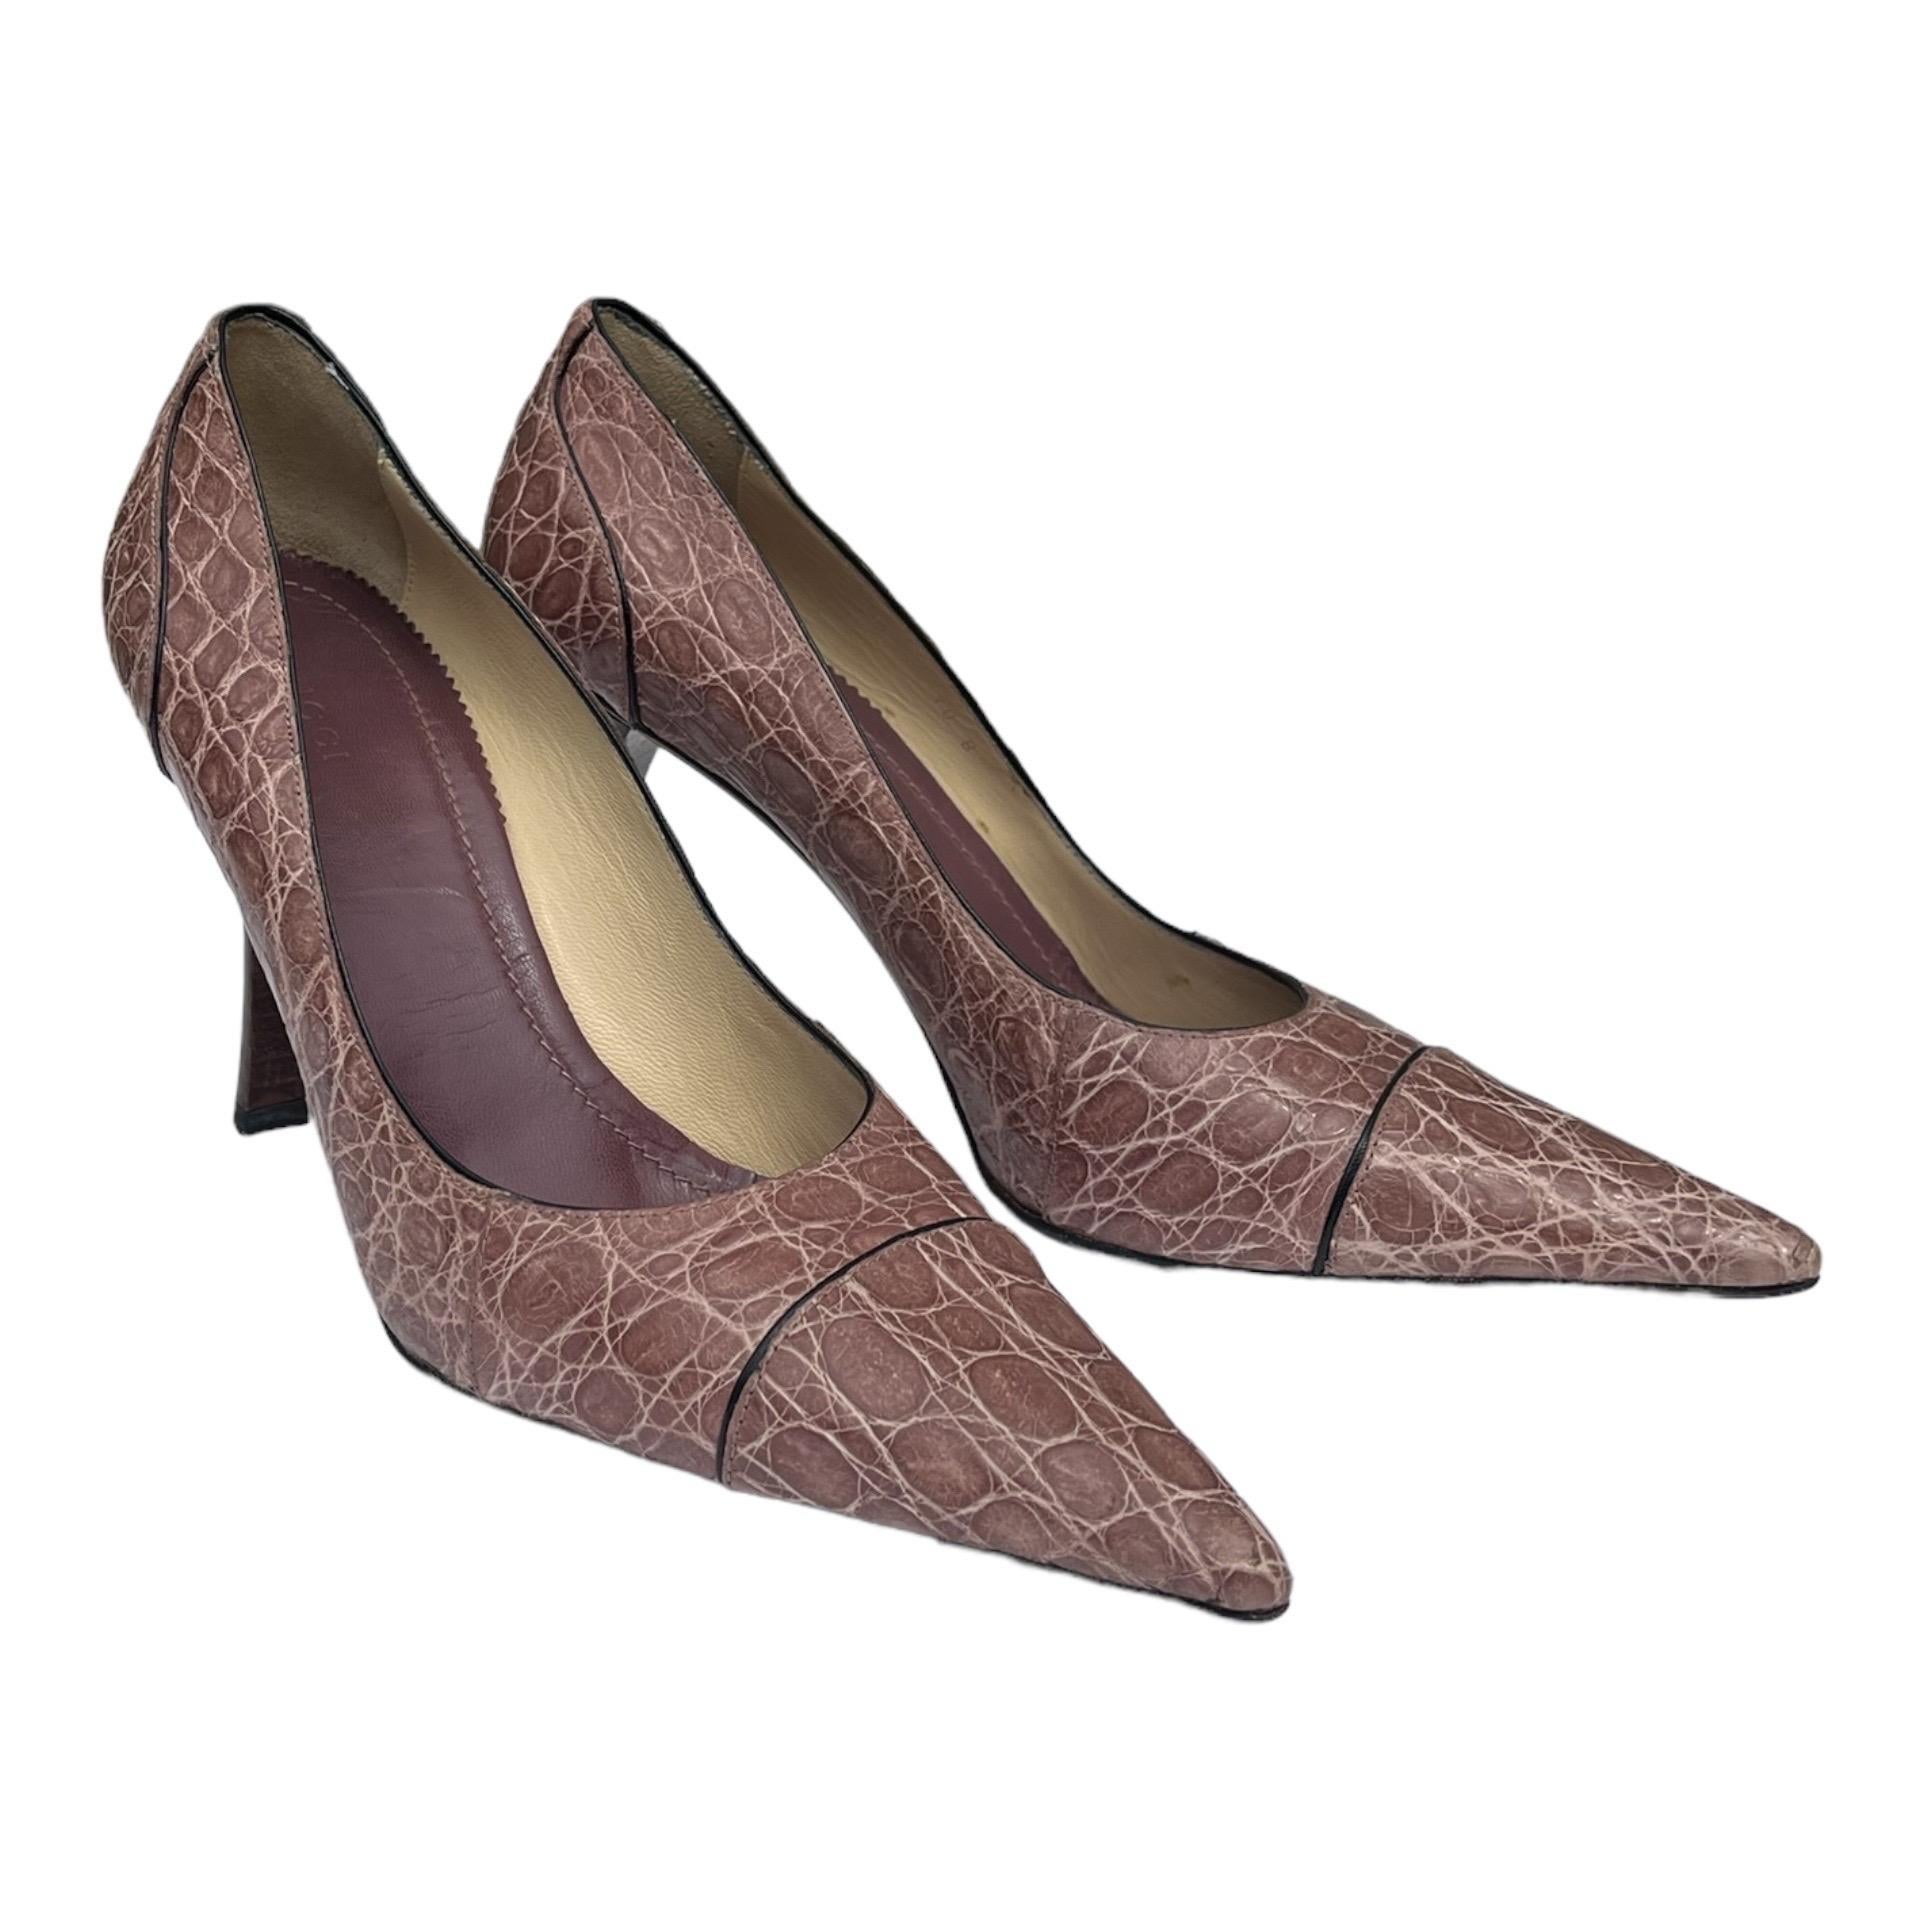 GUCCI CROCODILE SHOES FROM TOM FORD'S 2002 FALL COLLECTION
New Gucci's shoe reaches new heights of show-stopping style in genuine crocodile skin with pointy toe and high heel.
Italian size 40 B - US 10 B
Color: Dusty Rose
Genuine Crocodile, Leather